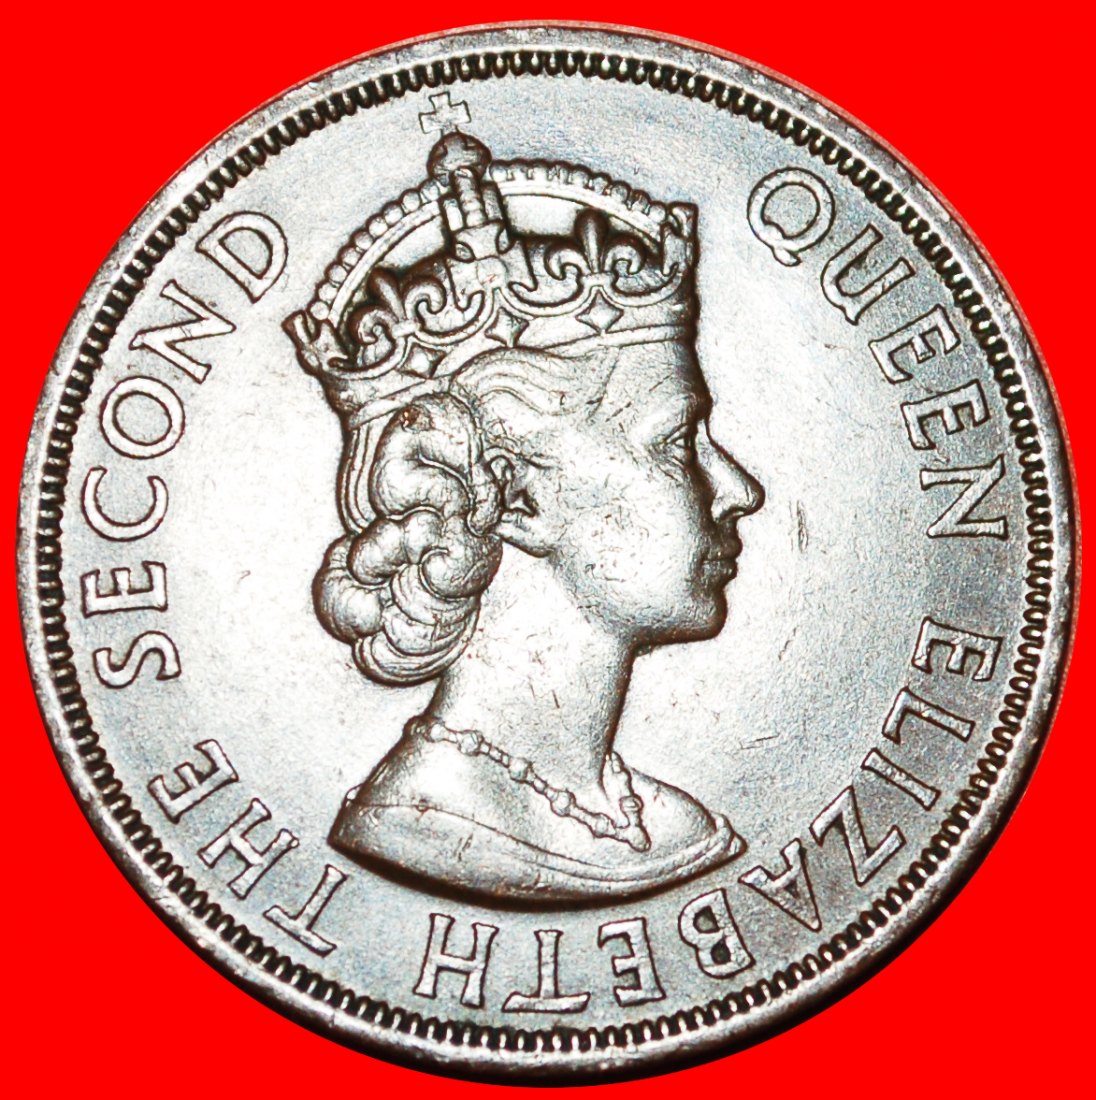  + GREAT BRITAIN: JERSEY ★ 1/12 SHILLING 1945 (1953)! LOW START ★ NO RESERVE!   